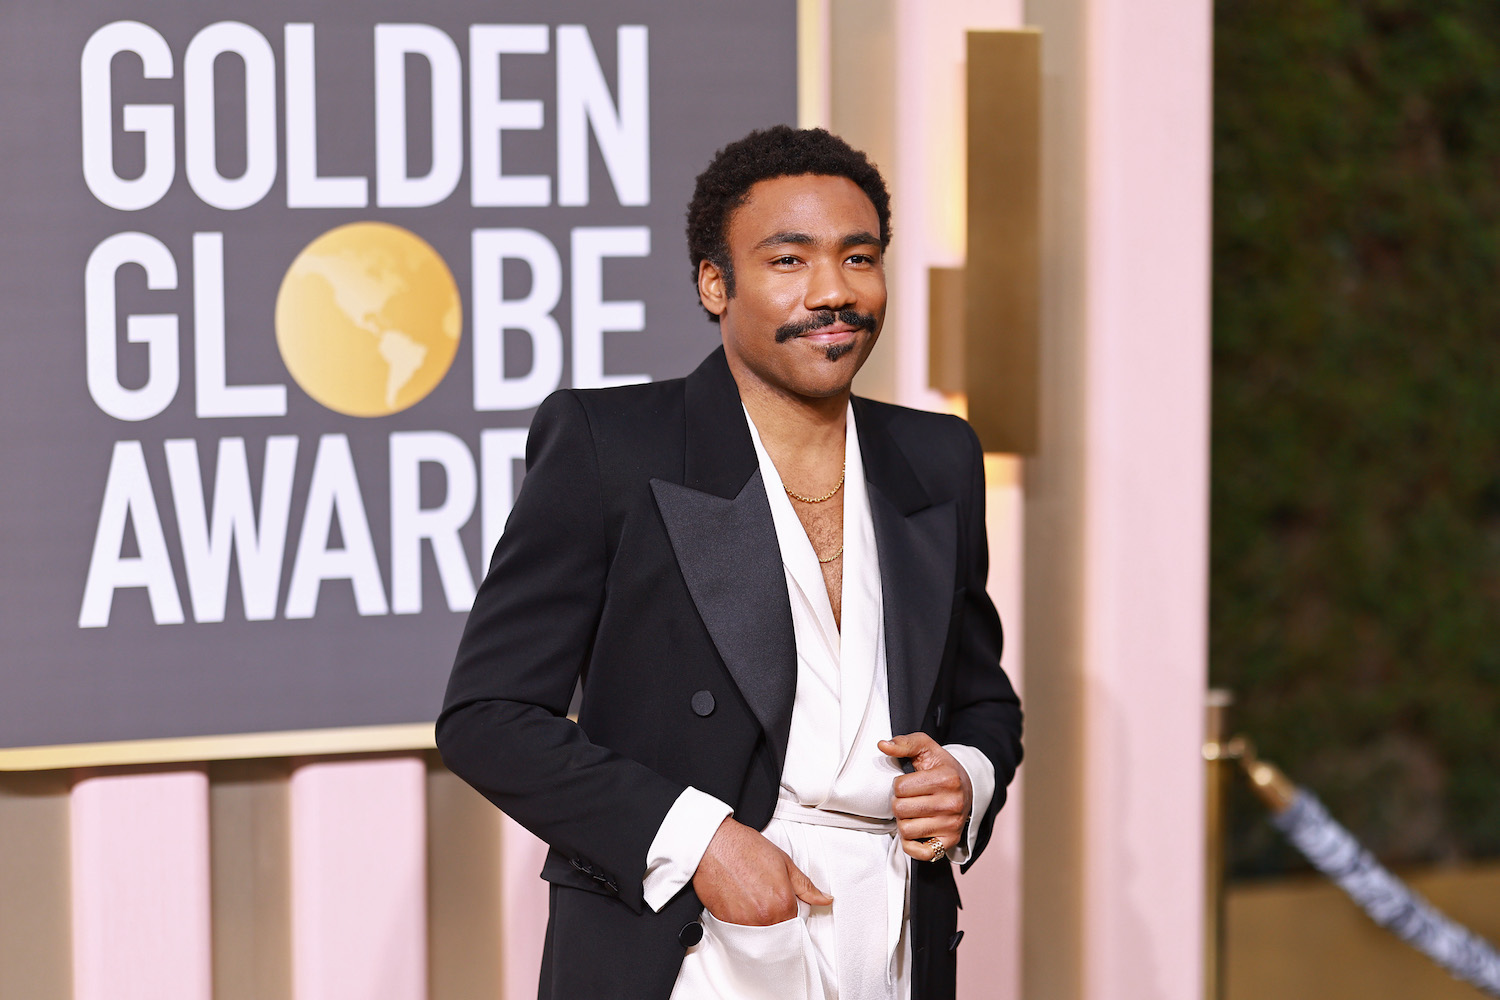 Donald Glover attends the 80th Annual Golden Globe Awards in Saint Laurent.